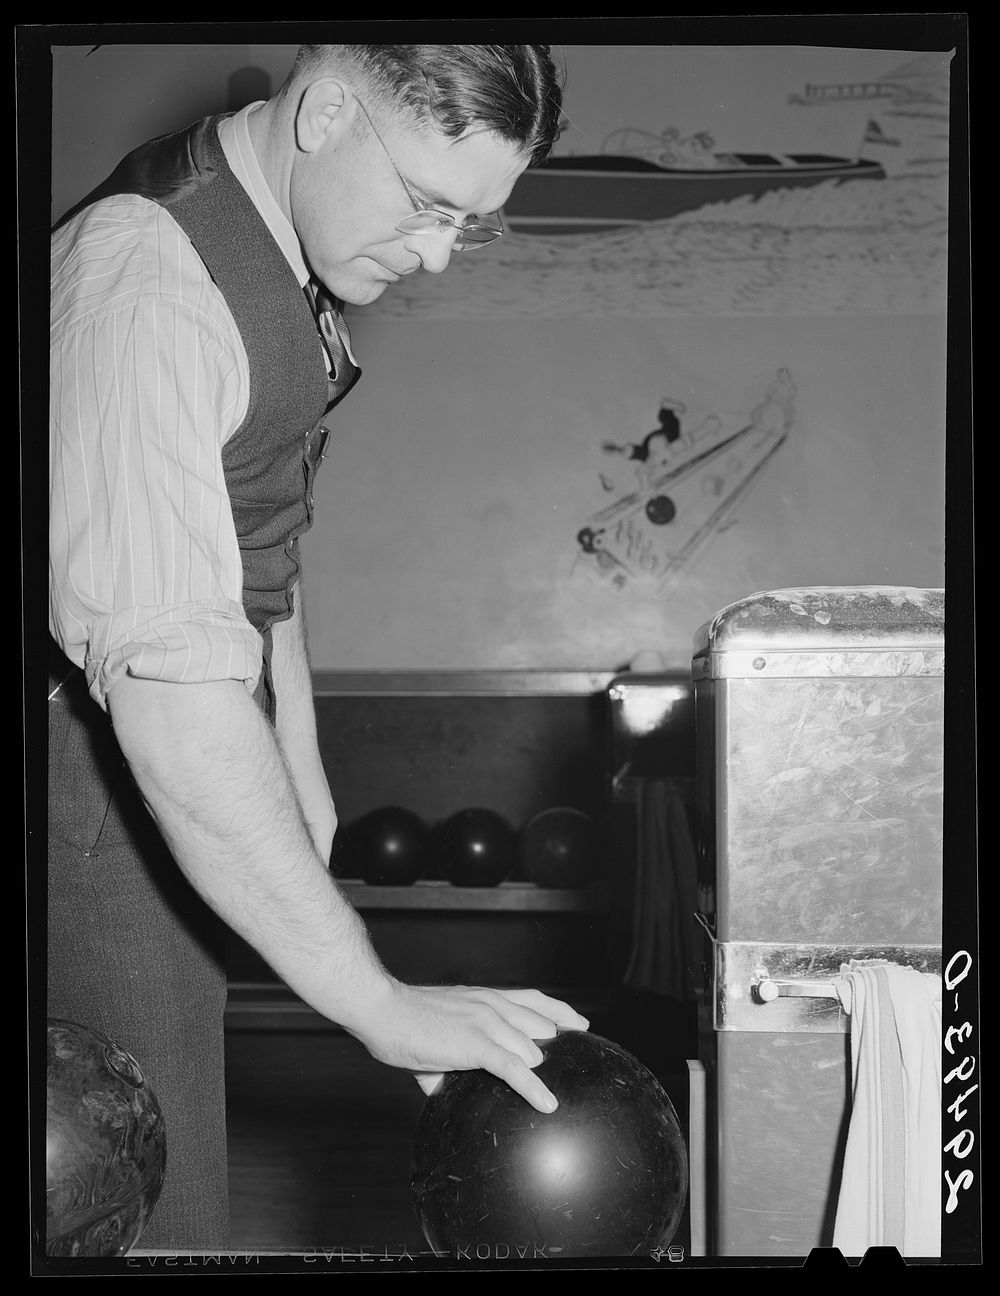 [Untitled photo, possibly related to: Bowling. Clinton, Indiana]. Sourced from the Library of Congress.